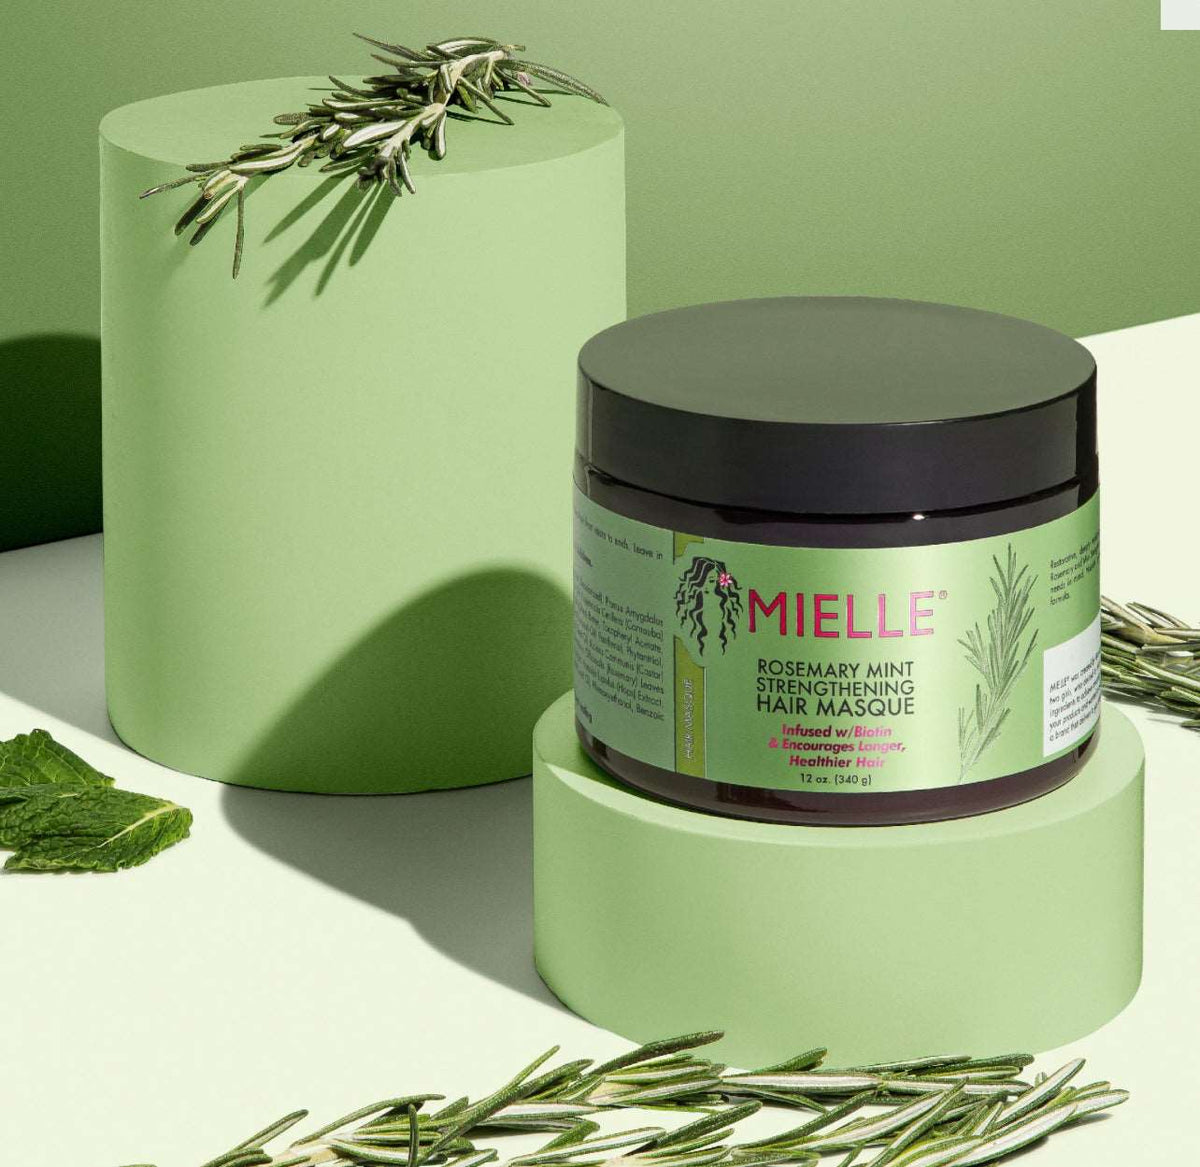 MIELLE MASQUE CAPPILAIRE FORTIFIANT ROSEMARY MINT